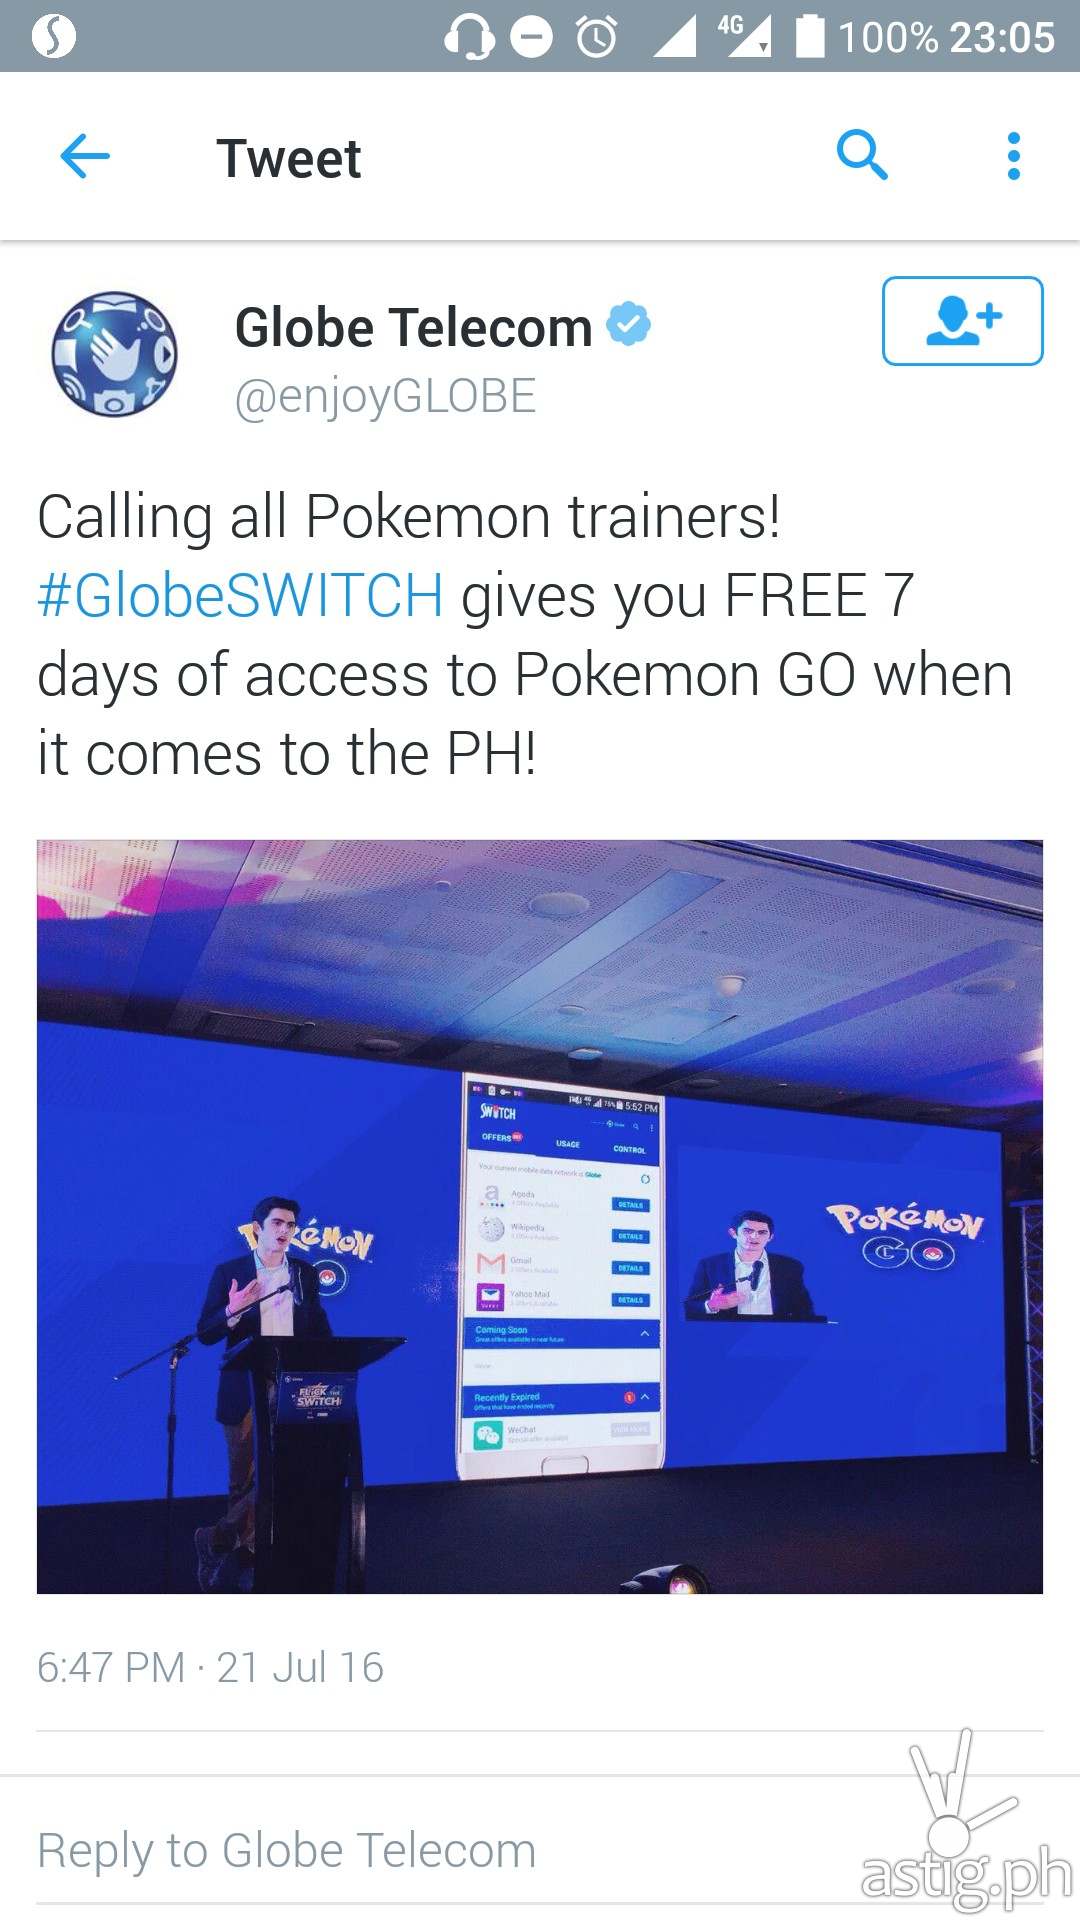 Pokemon Go announcement posted on Globe Telecom's official Twitter account